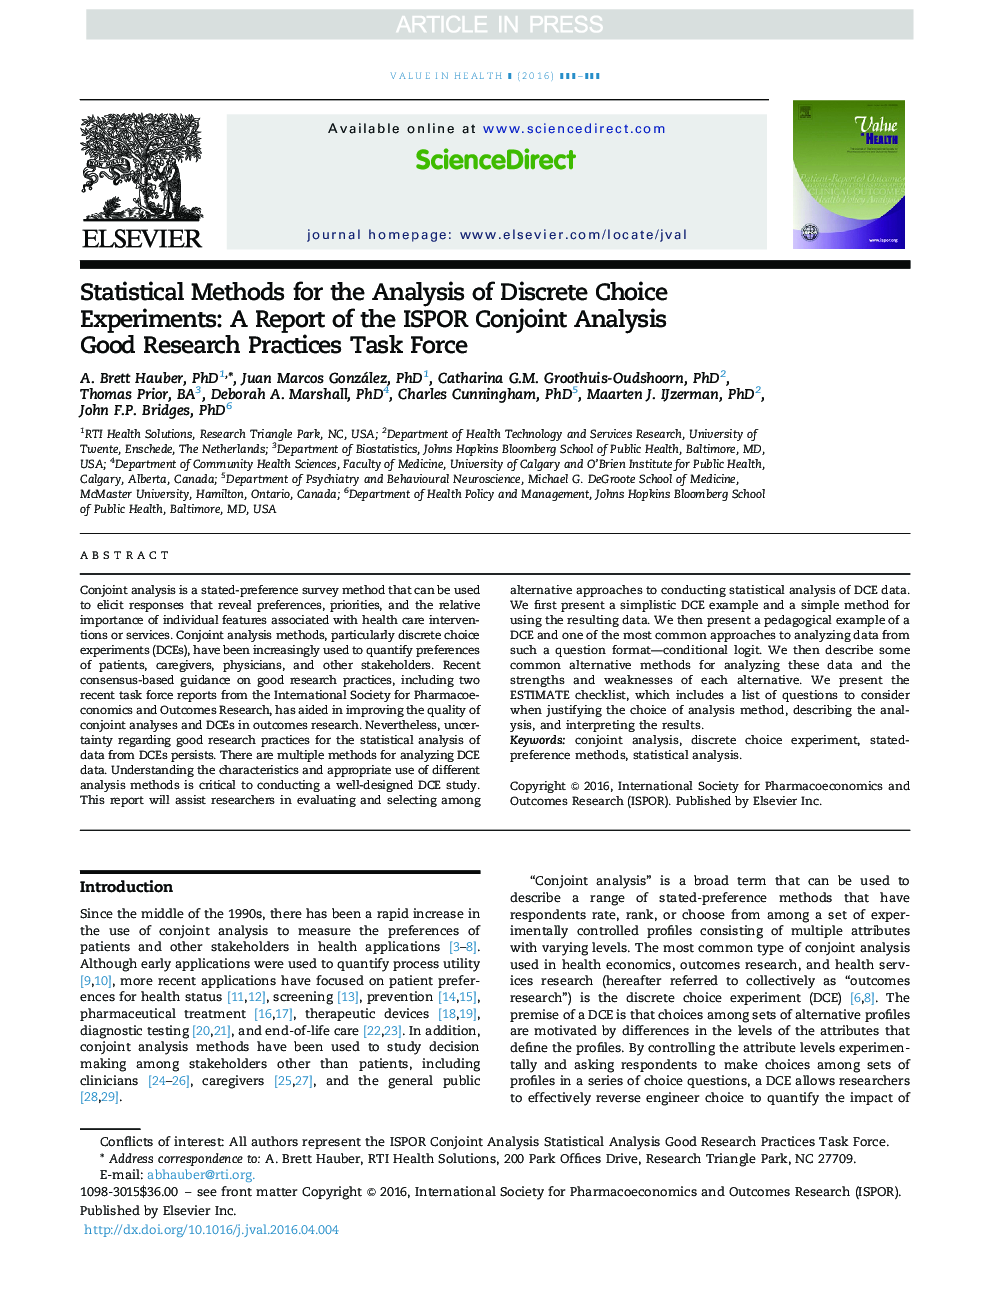 Statistical Methods for the Analysis of Discrete Choice Experiments: A Report of the ISPOR Conjoint Analysis Good Research Practices Task Force